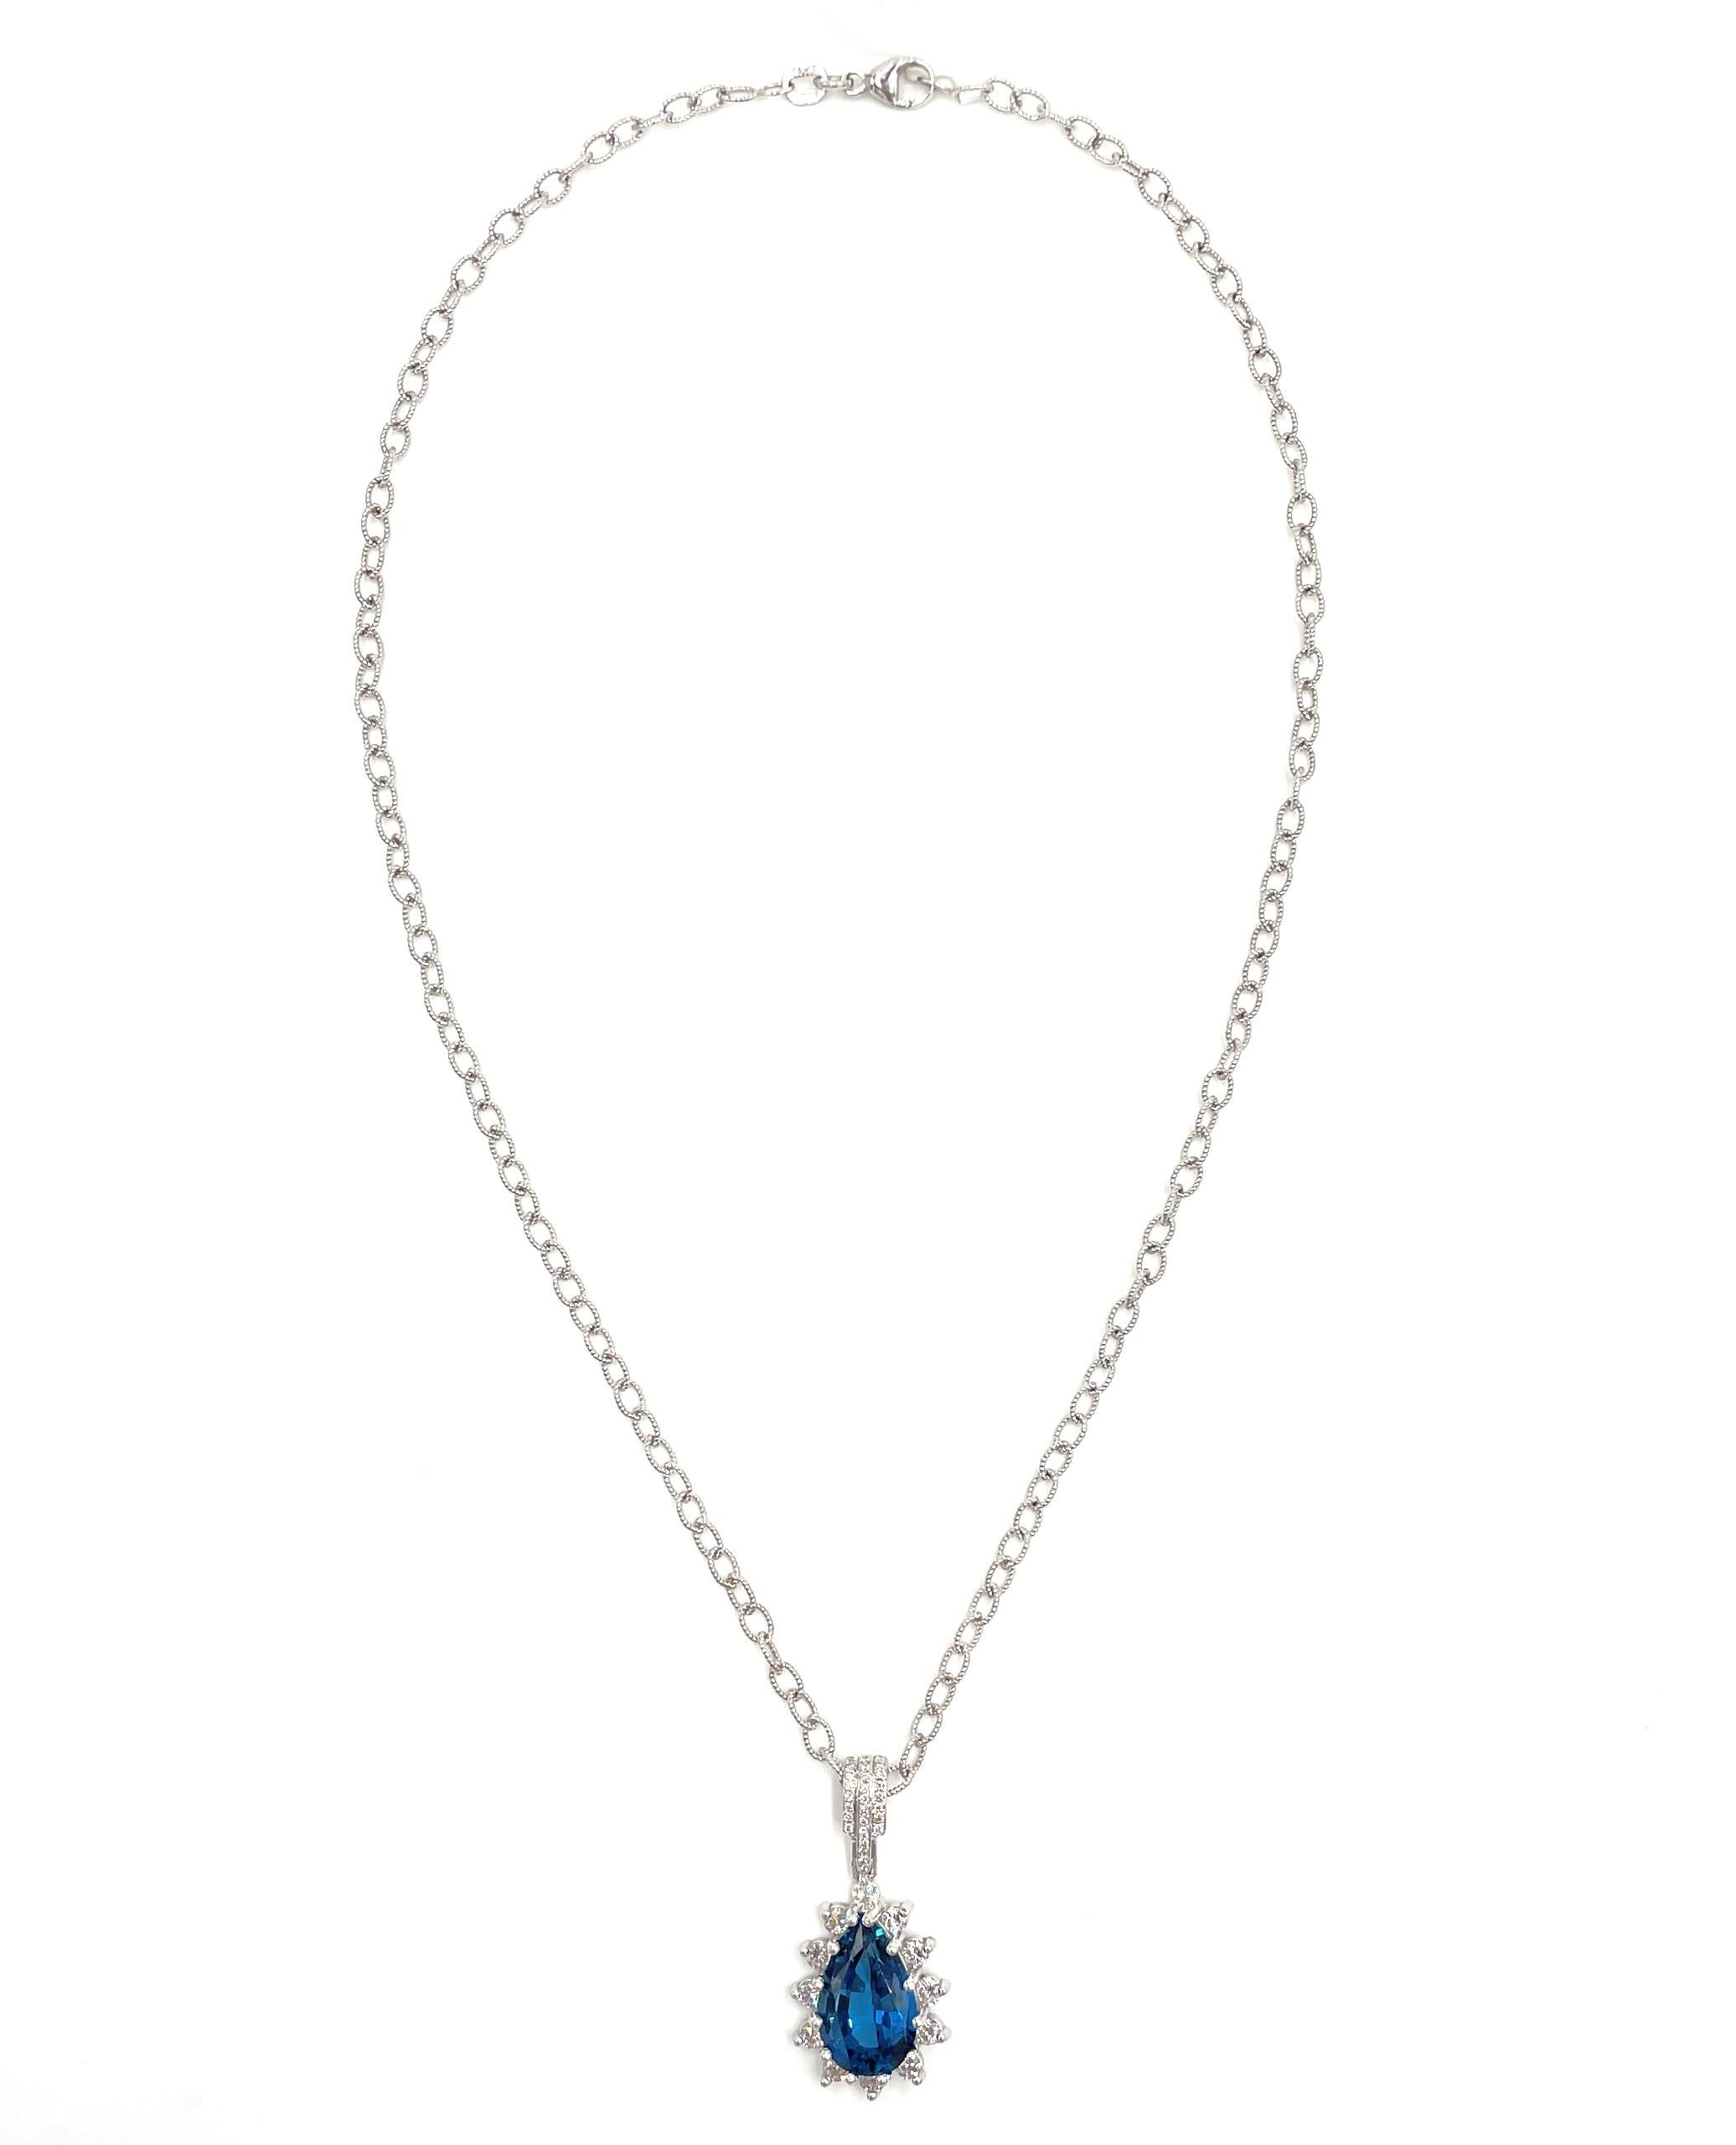 14K white gold pendant furnished with 12 round prong set diamonds weighing 0.62 carats total (G/H color, VS2/SI1 clarity) and 26 round diamonds weighing approximately 0.20 carats total (H color, SI clarity). In the center, one pear shape London blue